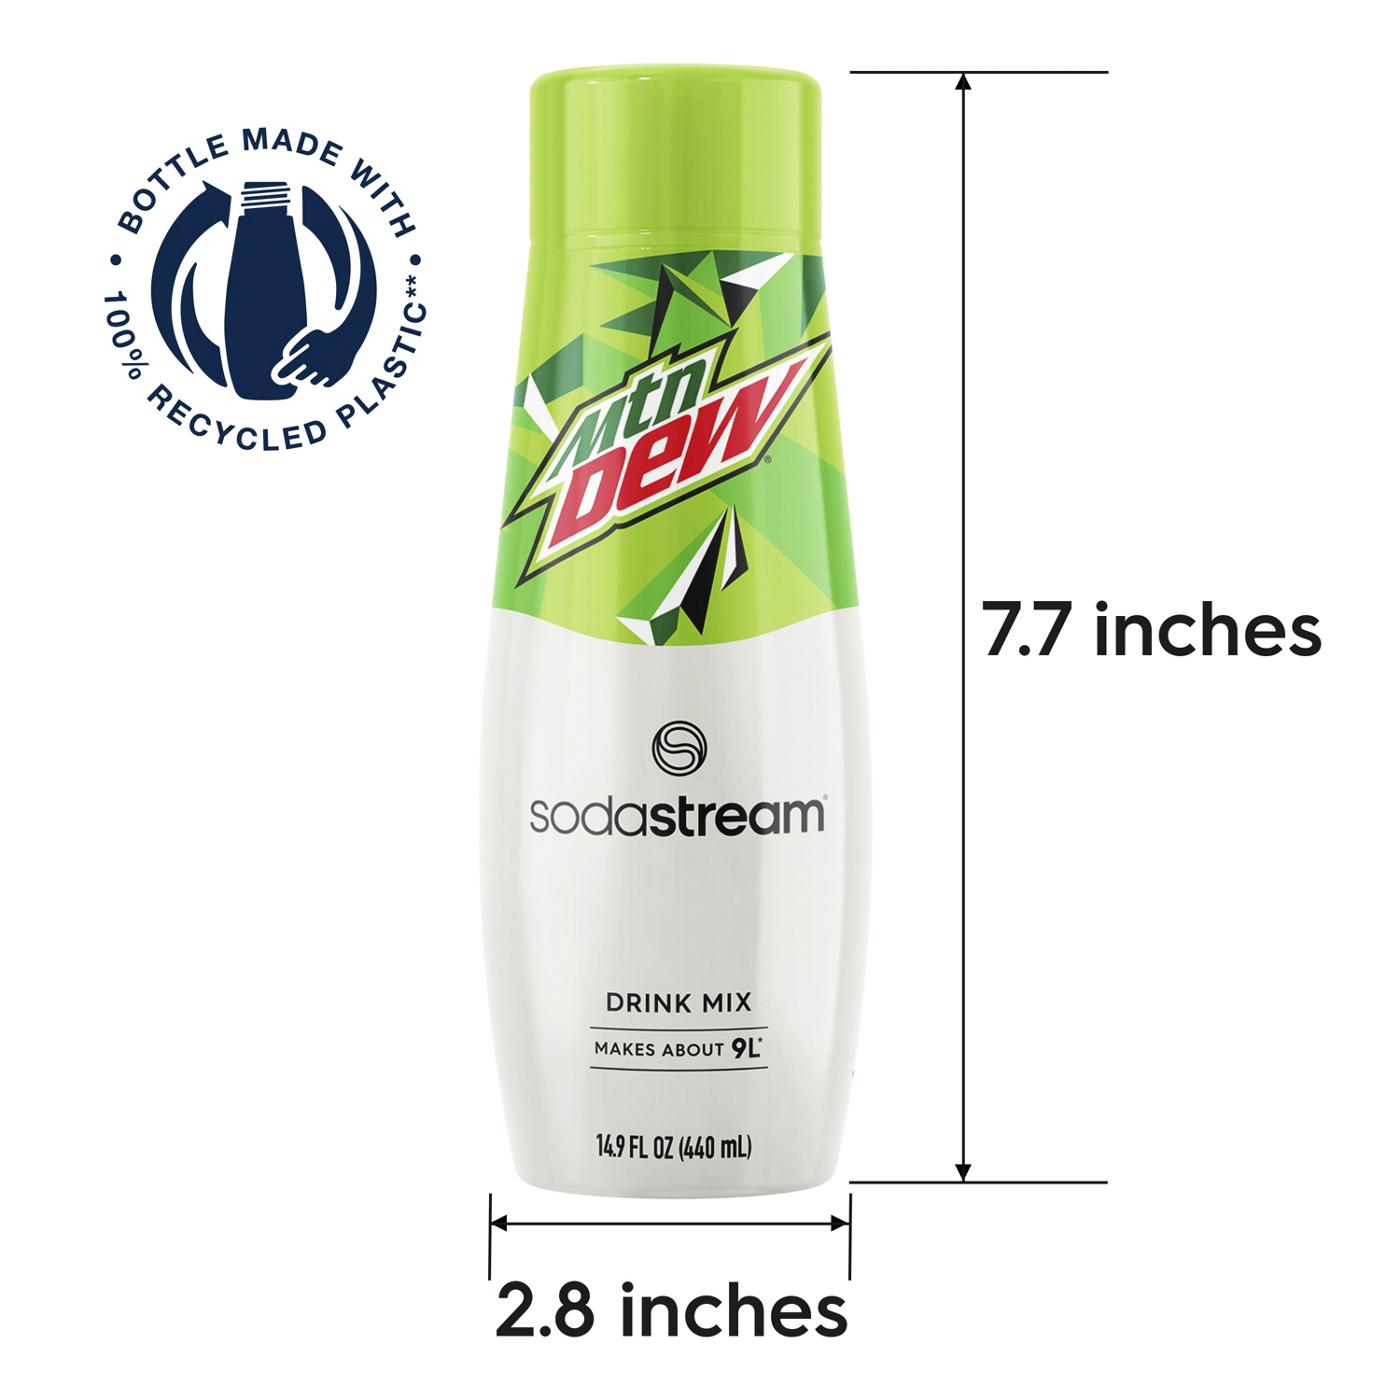 SodaStream Mountain Dew Drink Mix; image 2 of 4